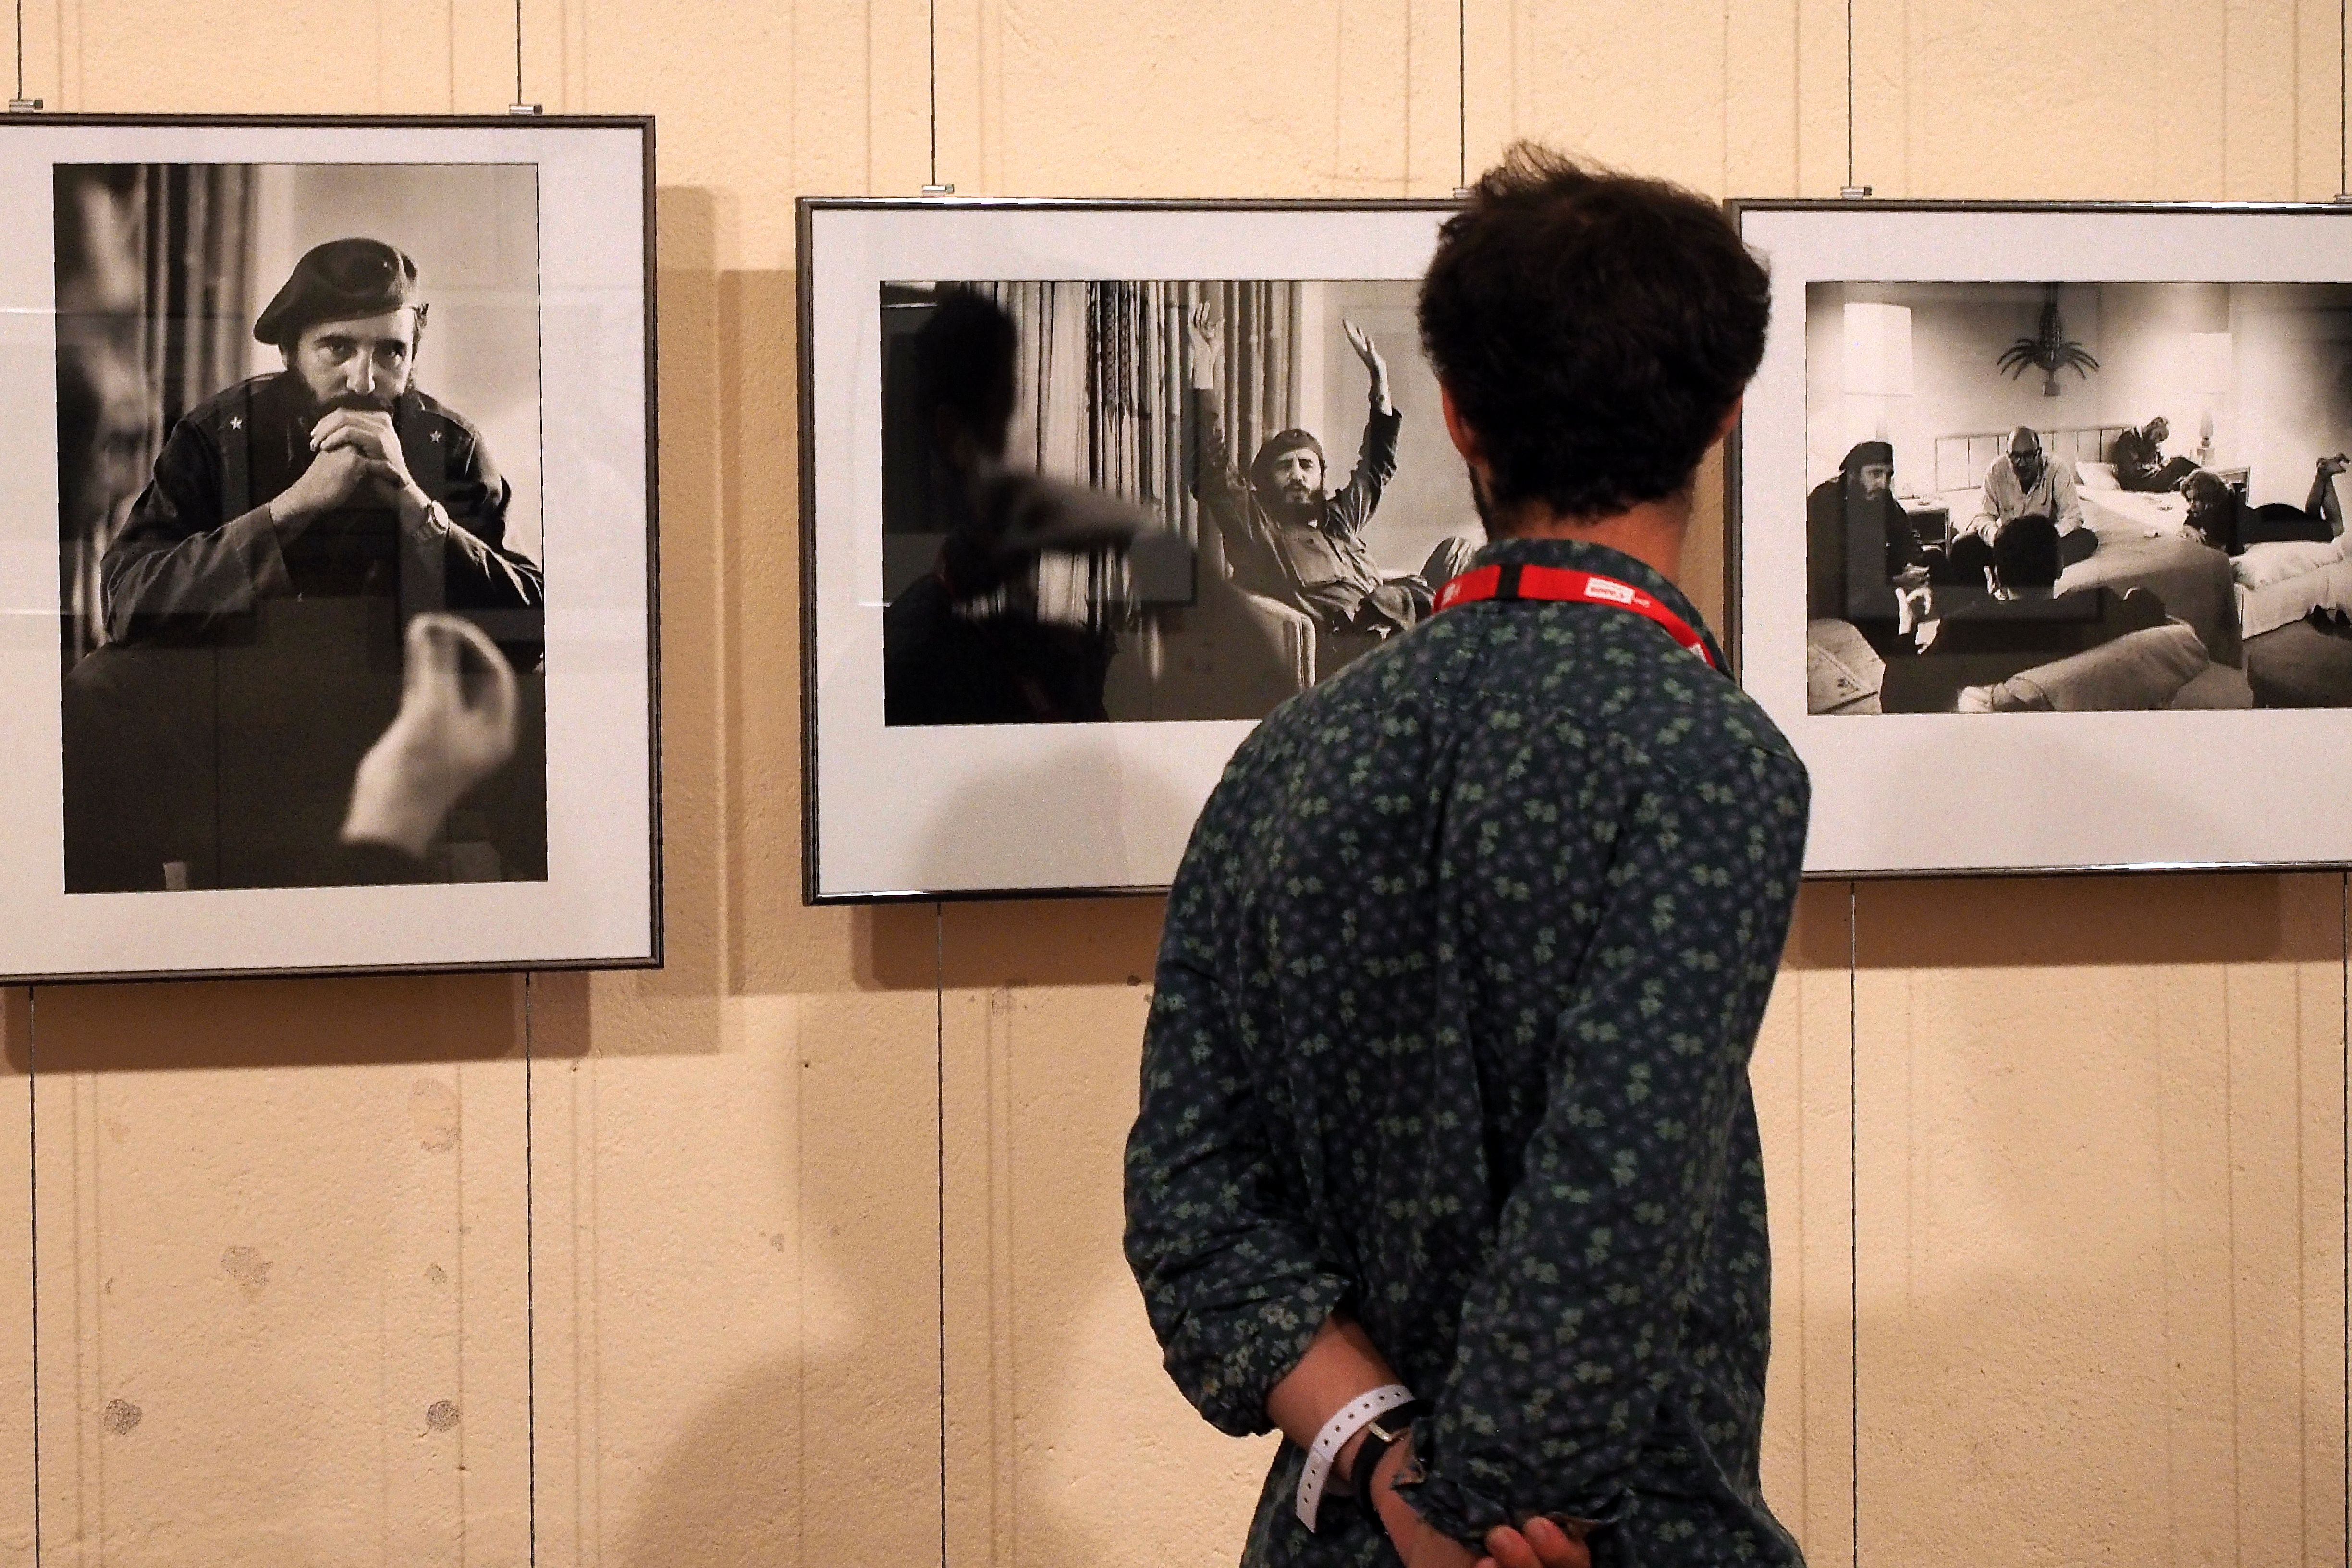 A visitor looks at photographies of the exhibition "Cuba" by French photographer and reporter Marc Riboud, on August 31, 2016, during the 28th Visa pour l'Image international festival of photojournalism in Perpignan, southern France. Photo: RAYMOND ROIG/AFP/Getty Images.